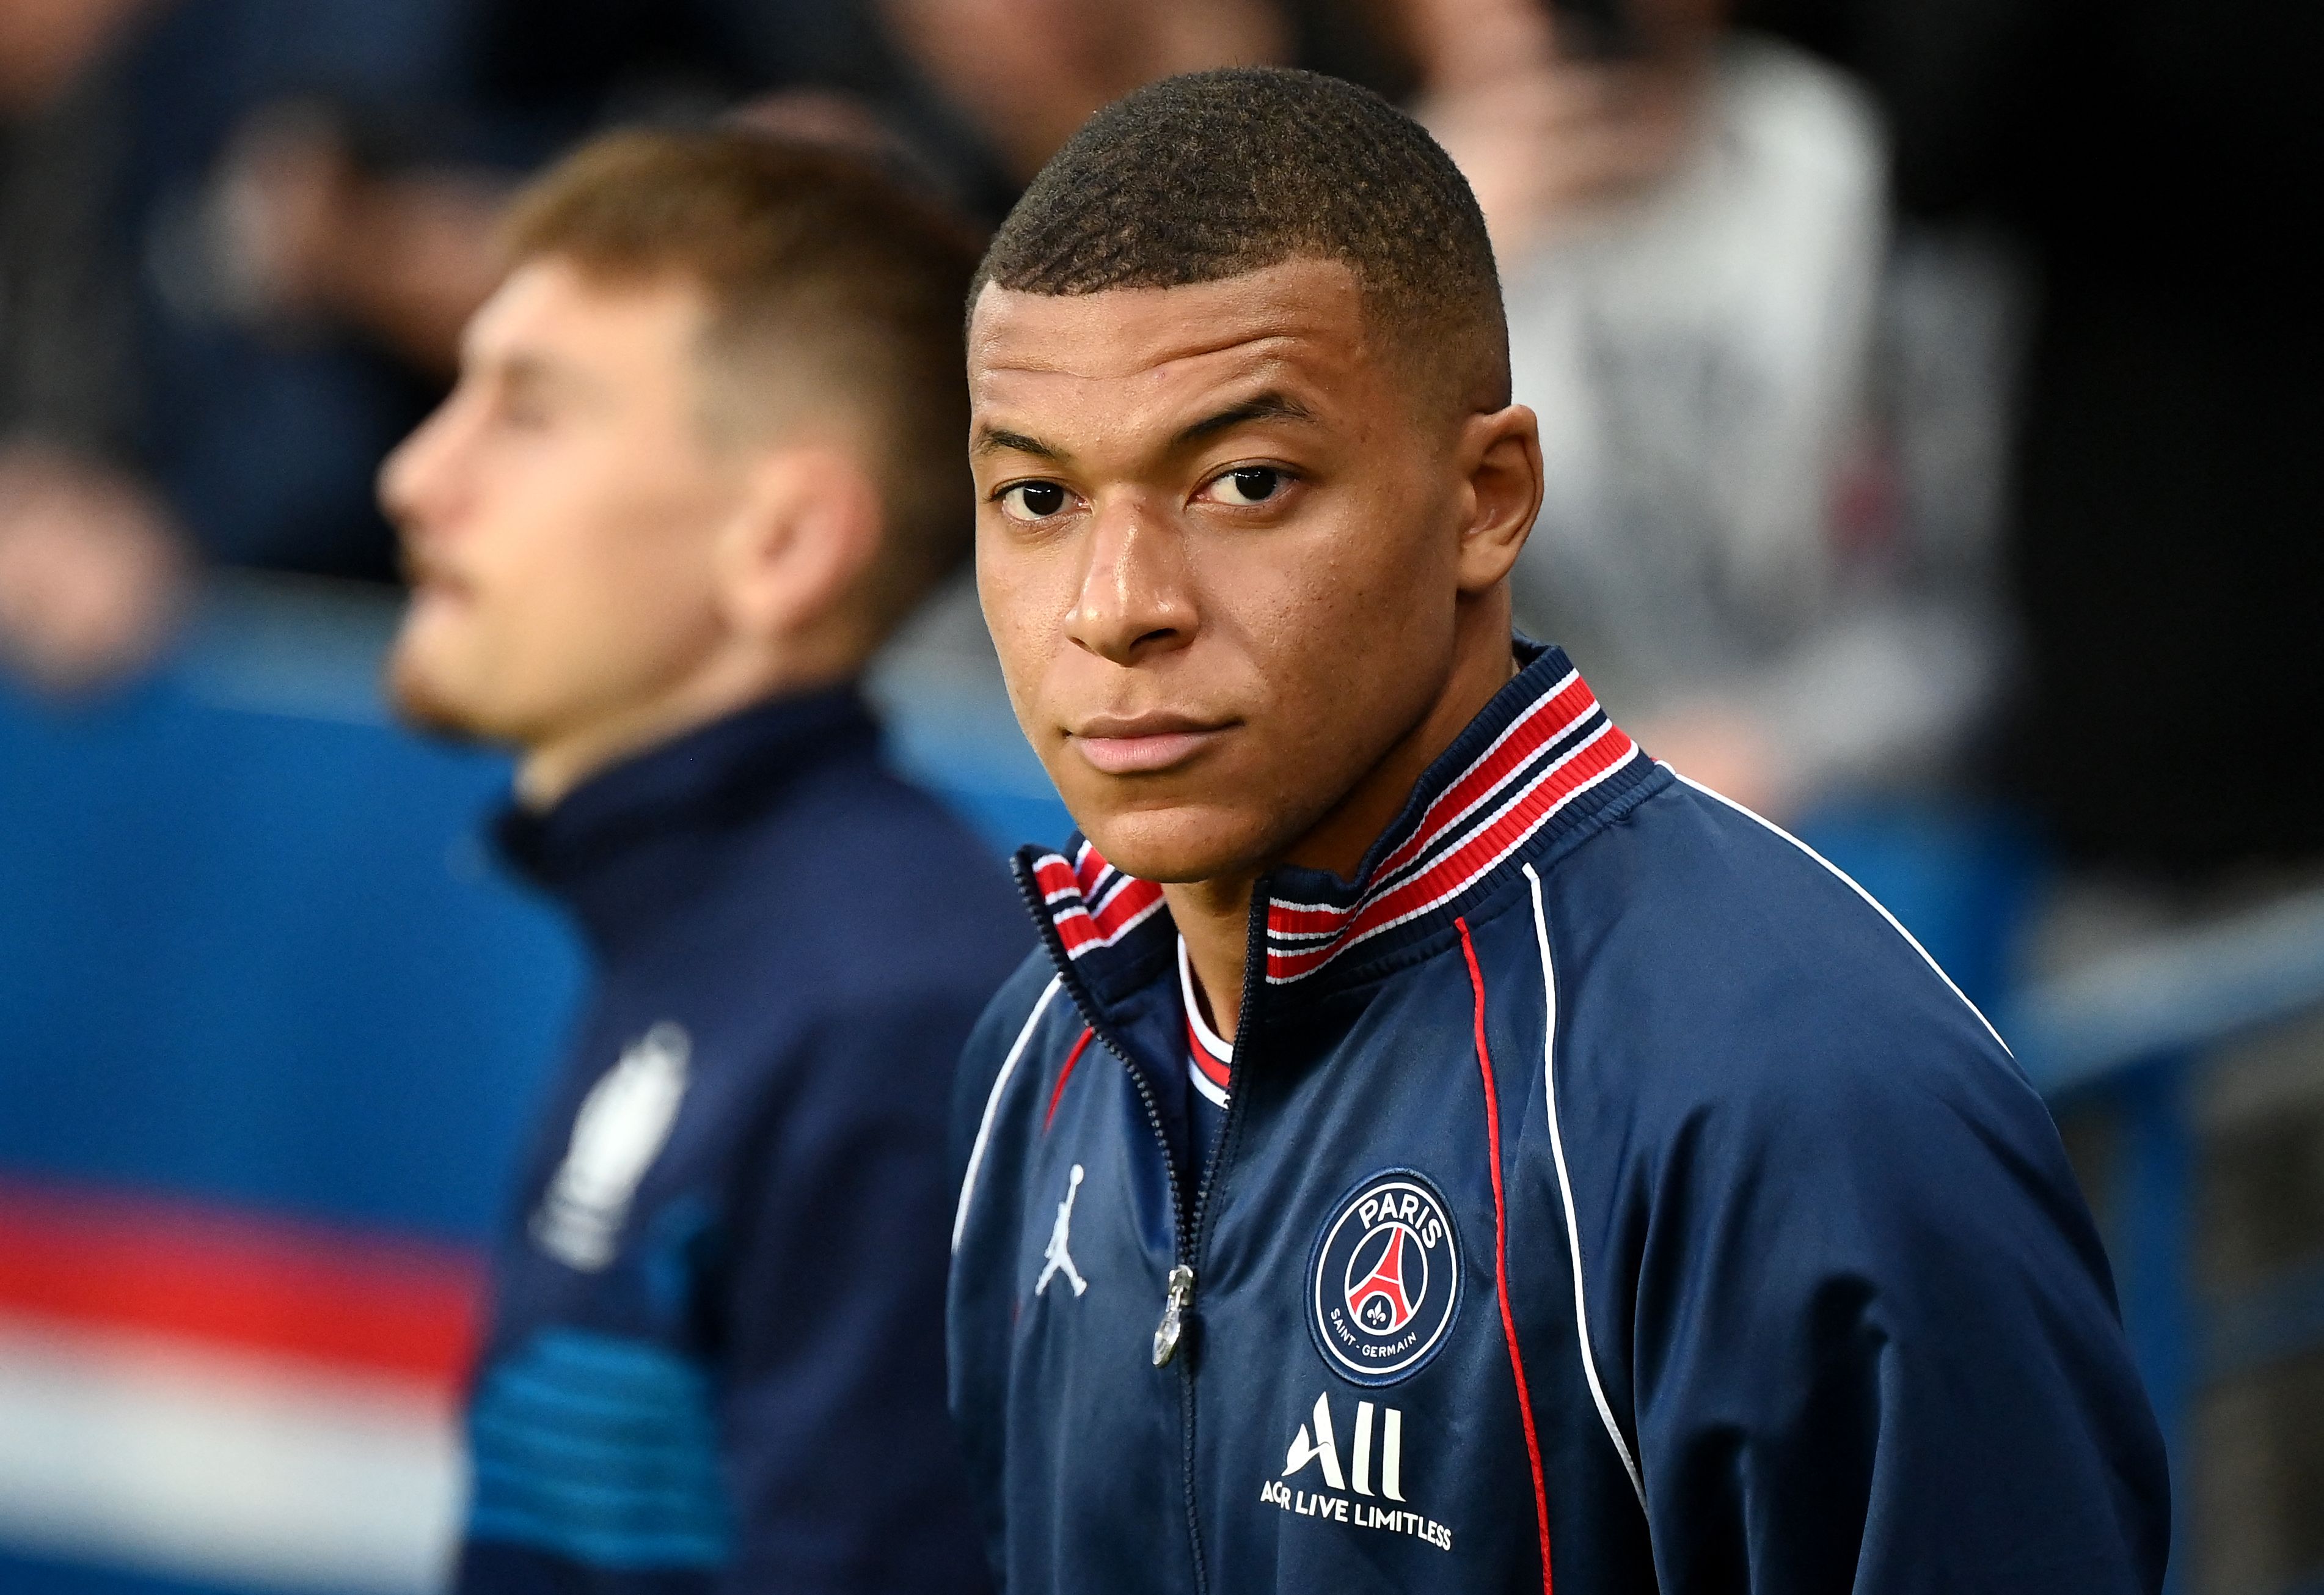 Psg Legend Gives Bold Claim On The Future Of Kylian Mbappé